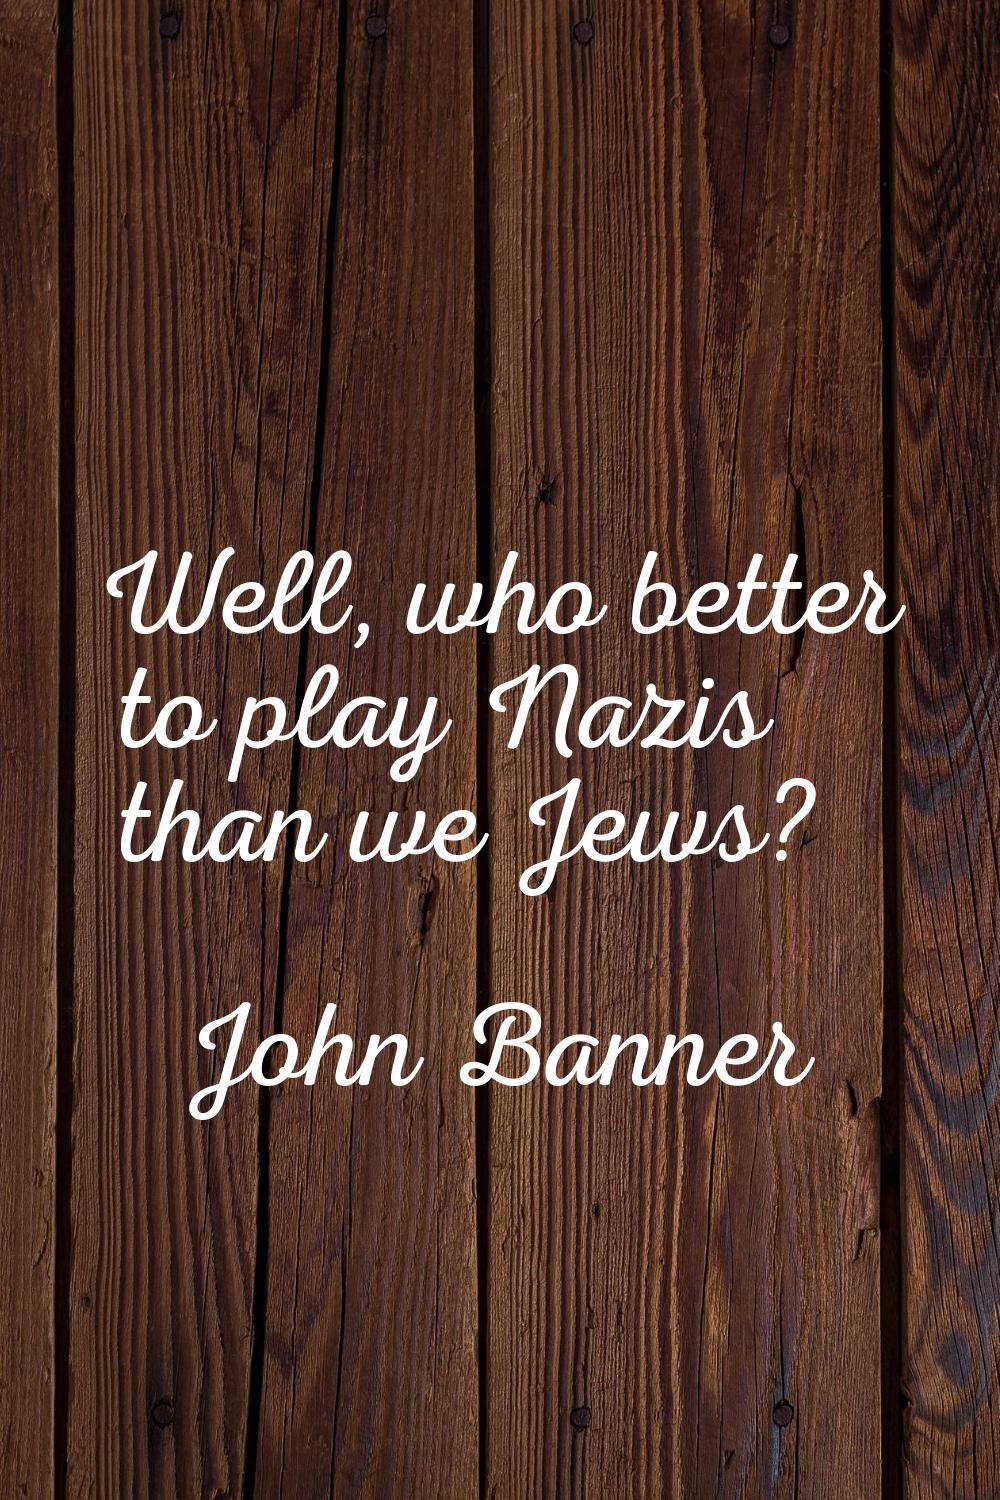 Well, who better to play Nazis than we Jews?